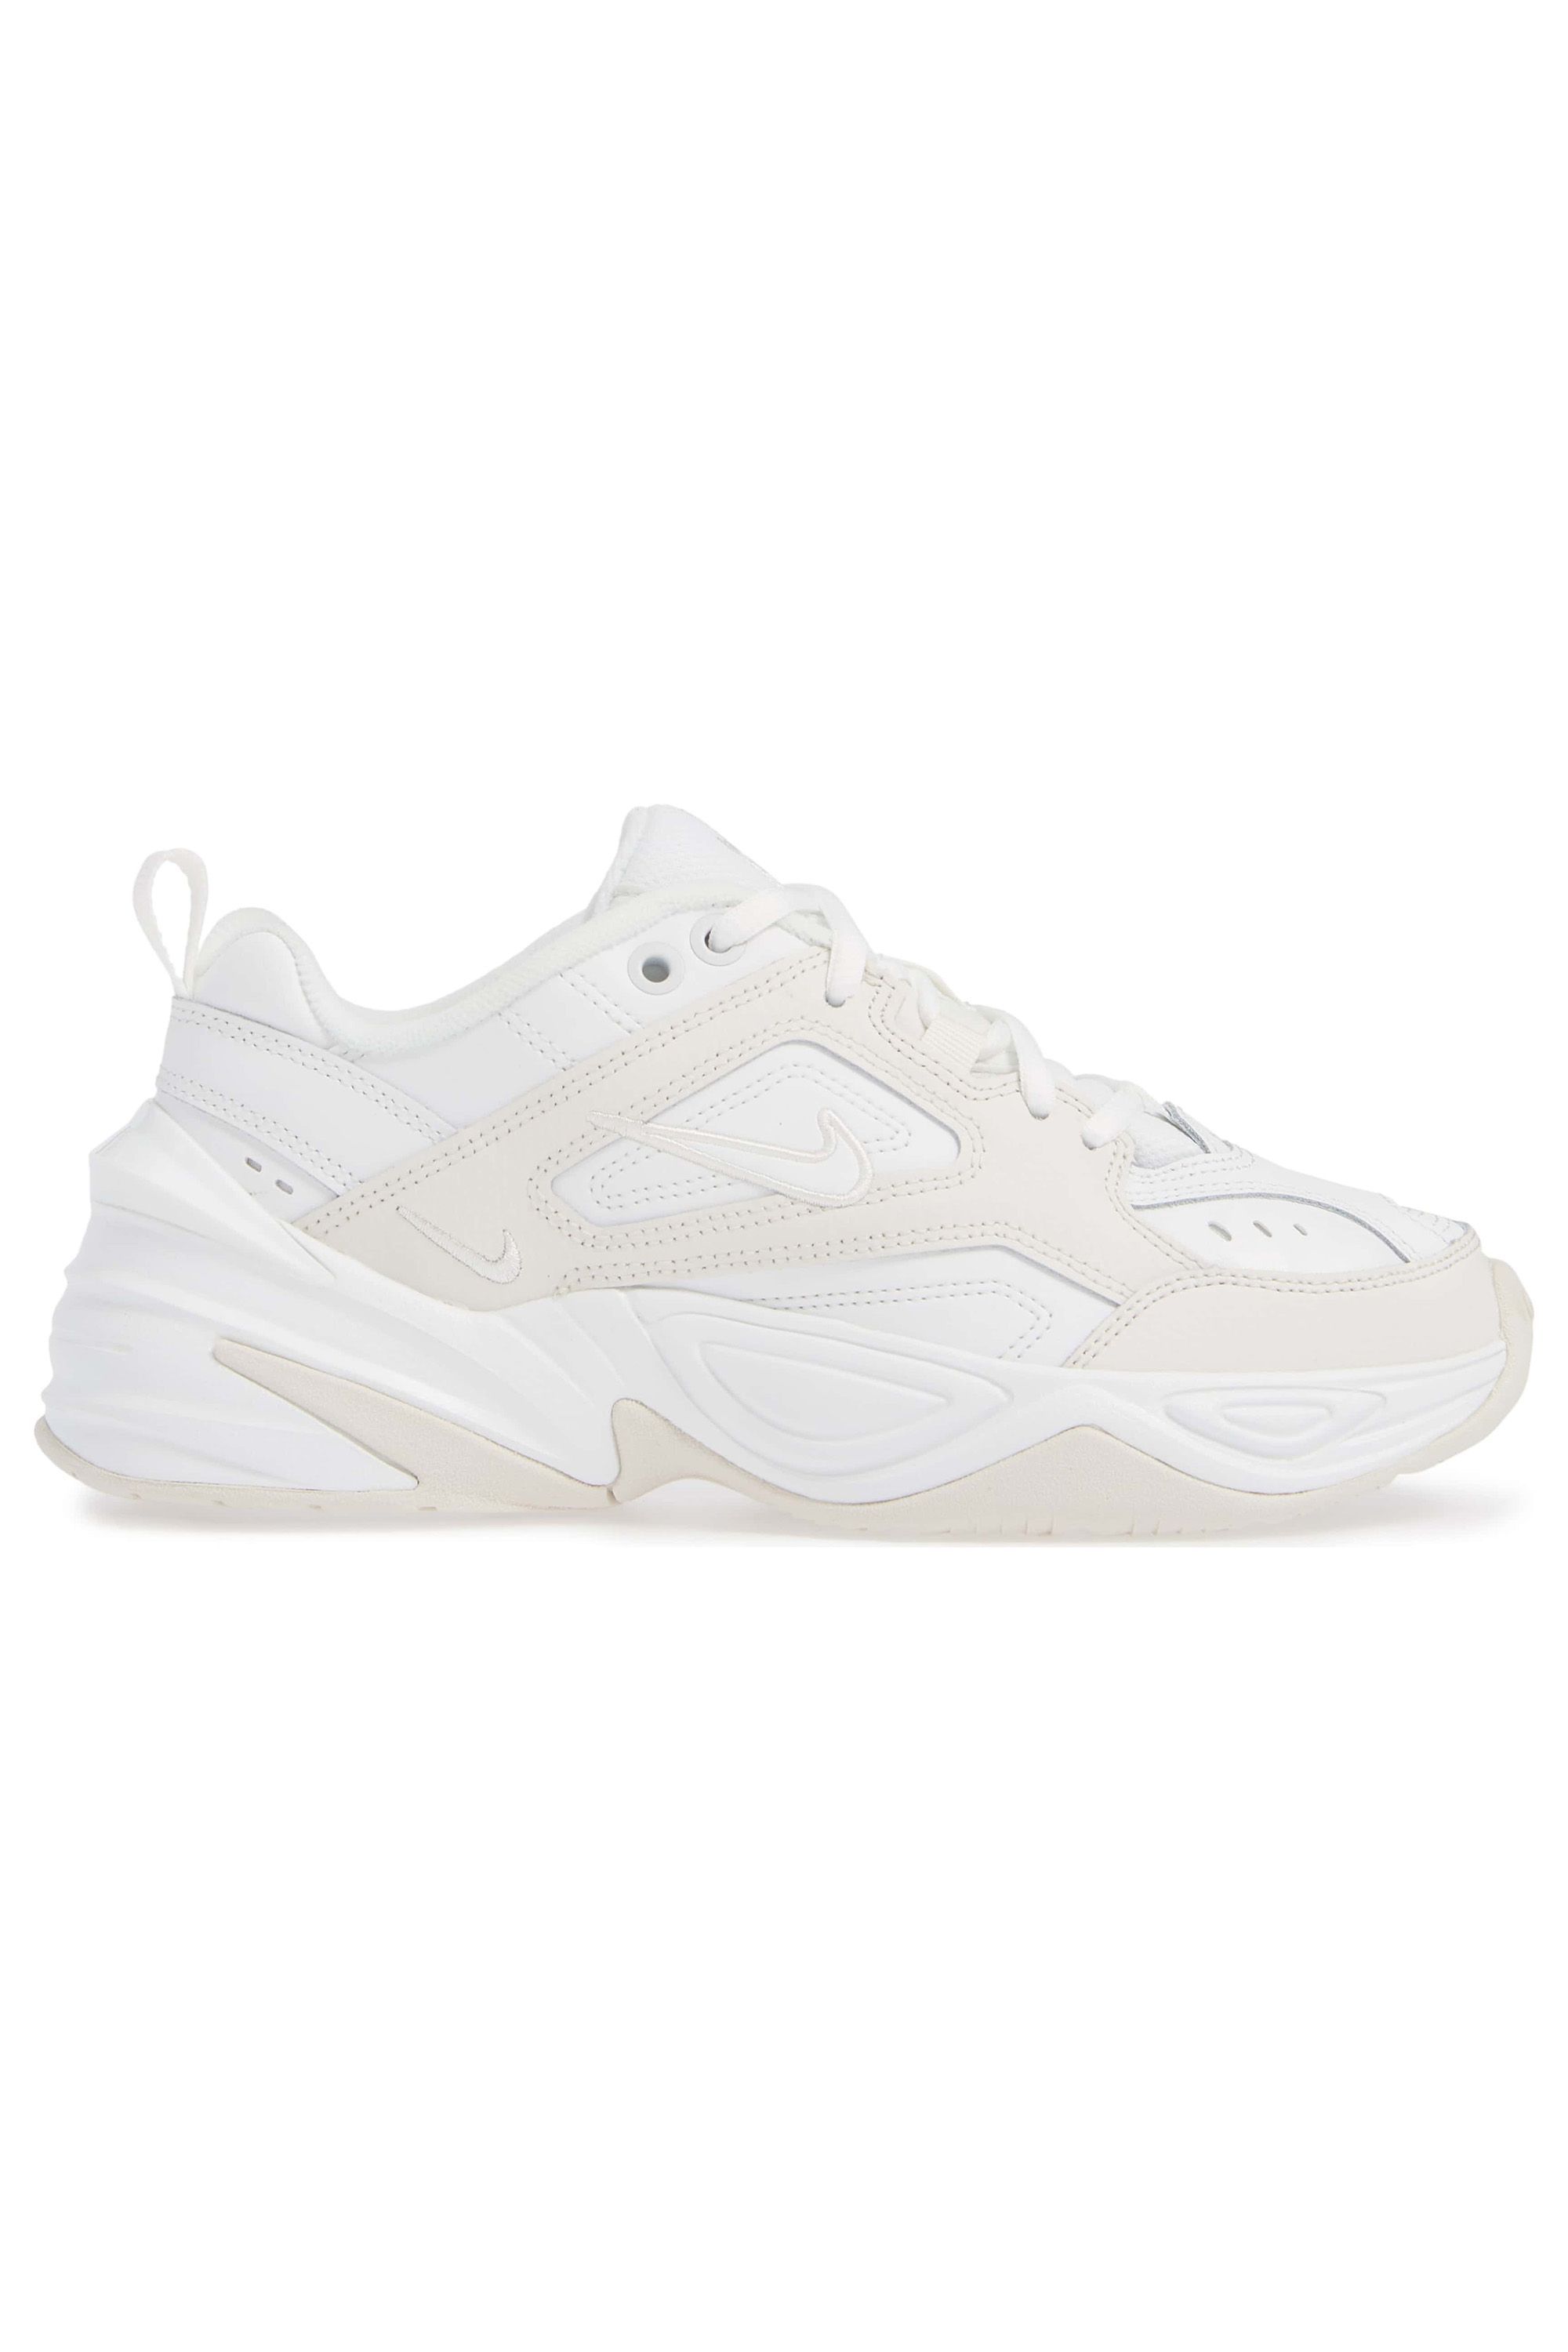 chunky white sneakers target